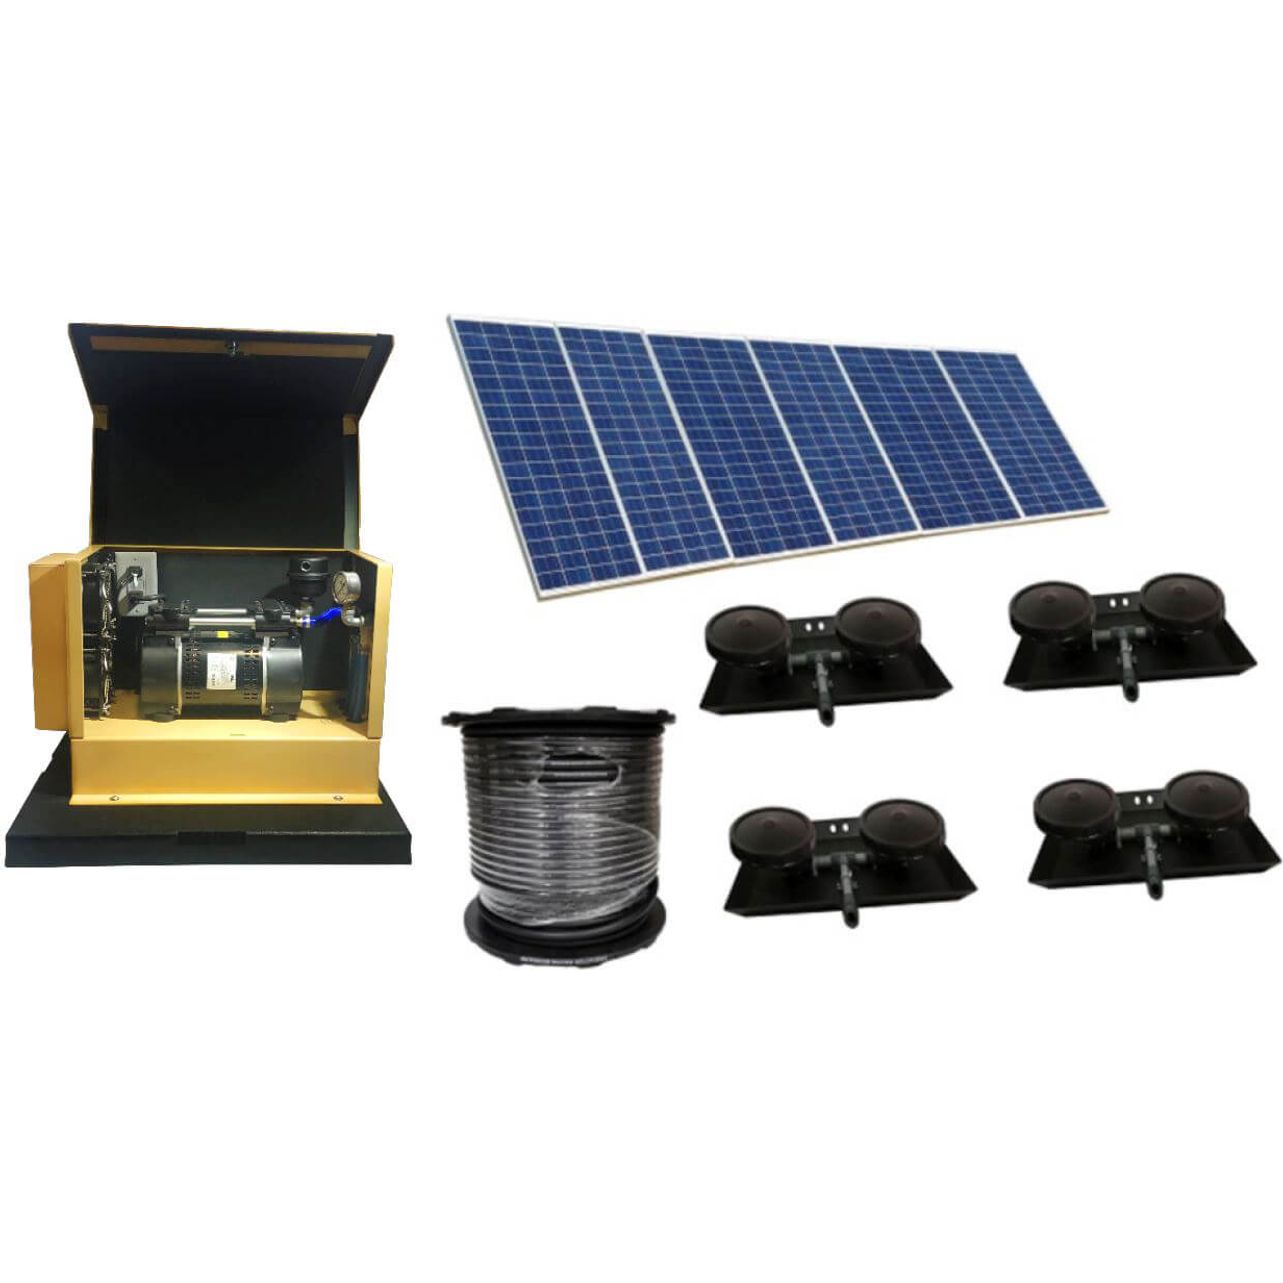 EasyPro SASD34 Deep Water Solar Aeration Complete System – Up to 4 acres - American Pond Supplies Easy Pro Aerator Aerator